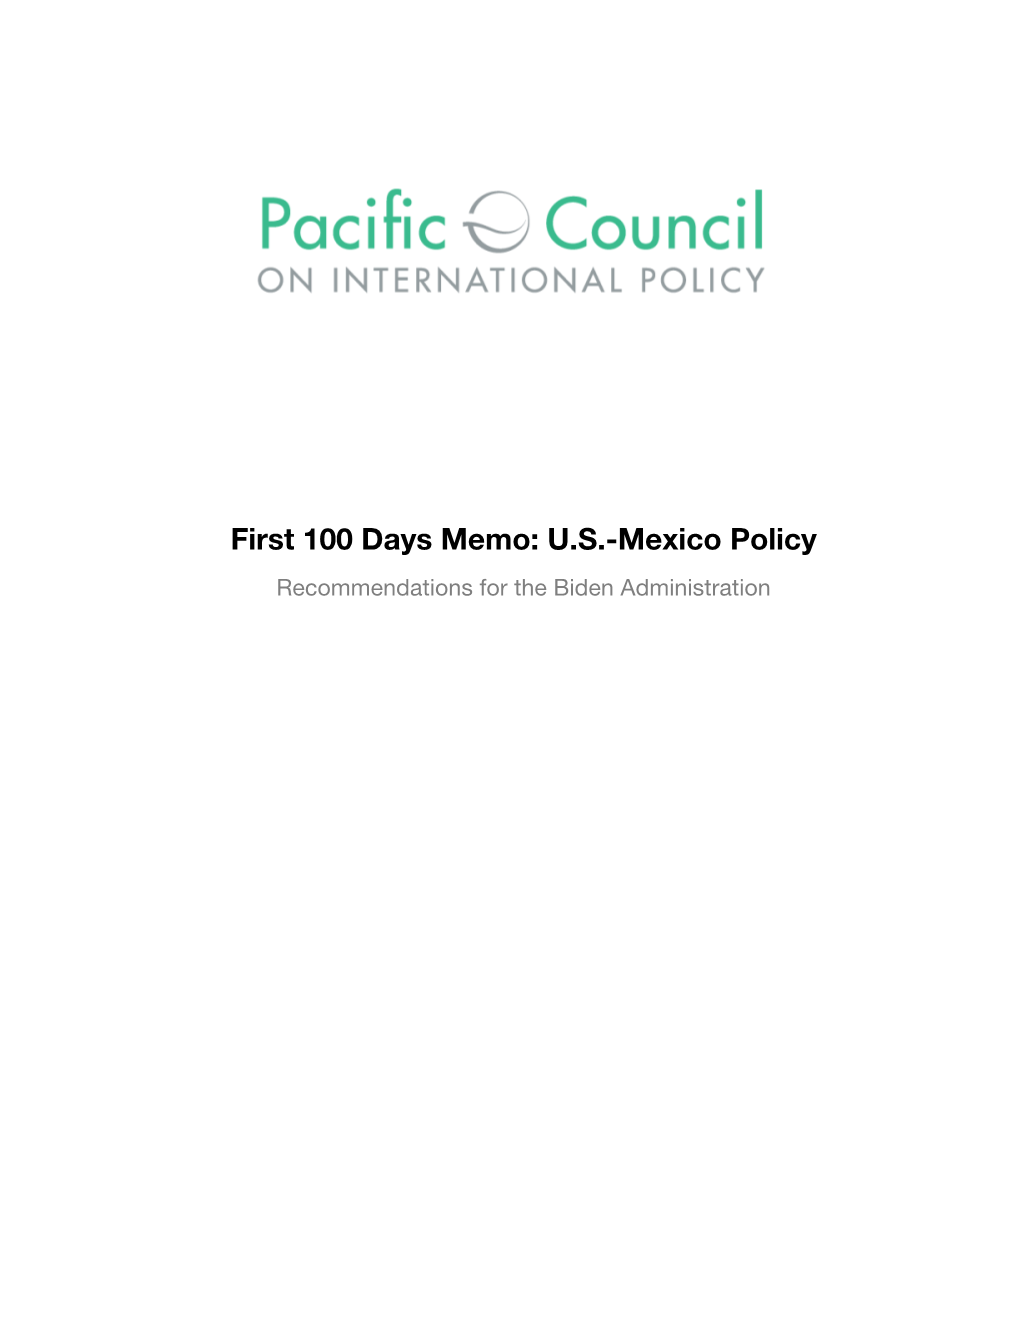 First 100 Days Memo: U.S.-Mexico Policy Recommendations for the Biden Administration